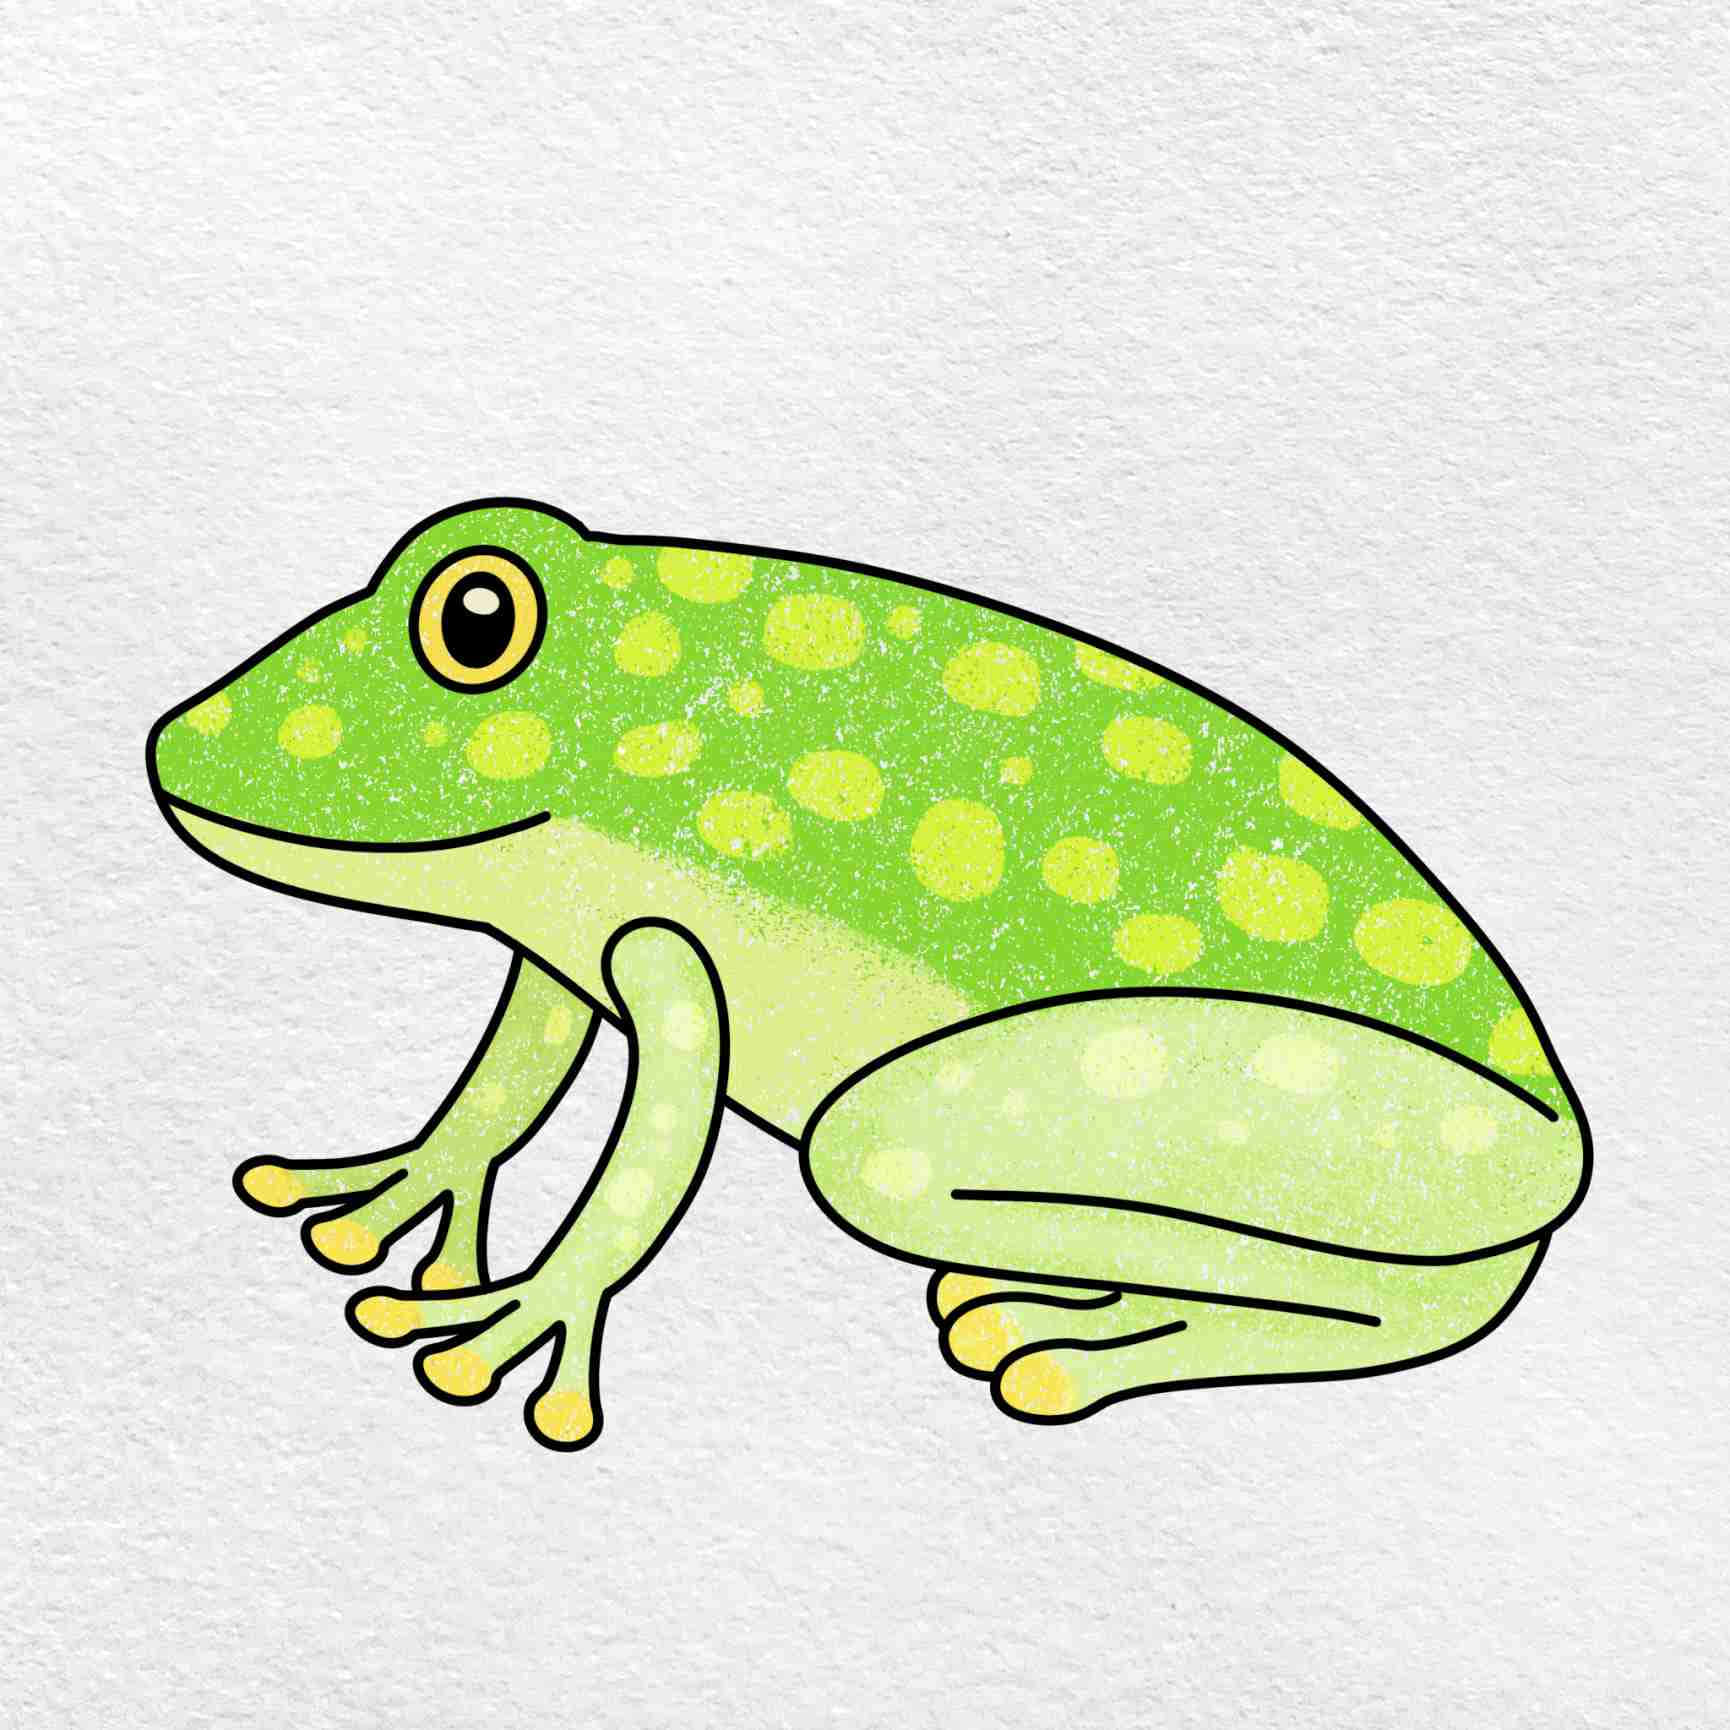 A beautiful sketch of a frog